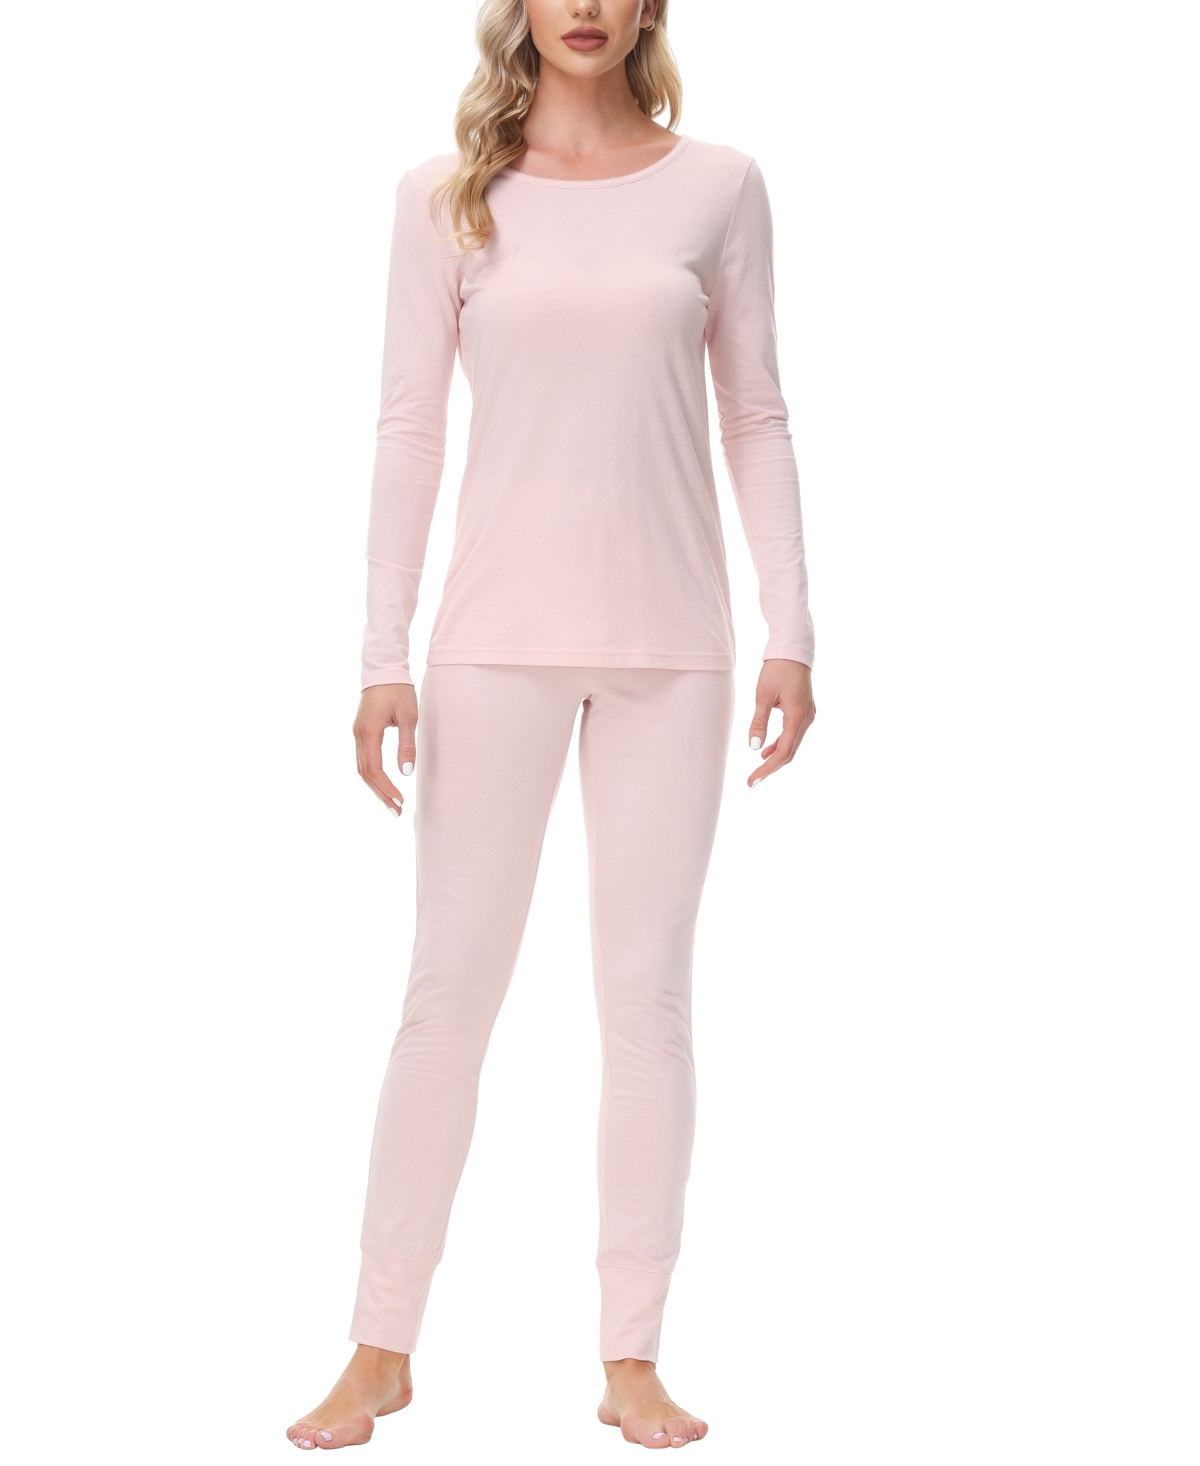 Ink+ivy Women's Knit Long Sleeve Scoop Neck with the Legging Set